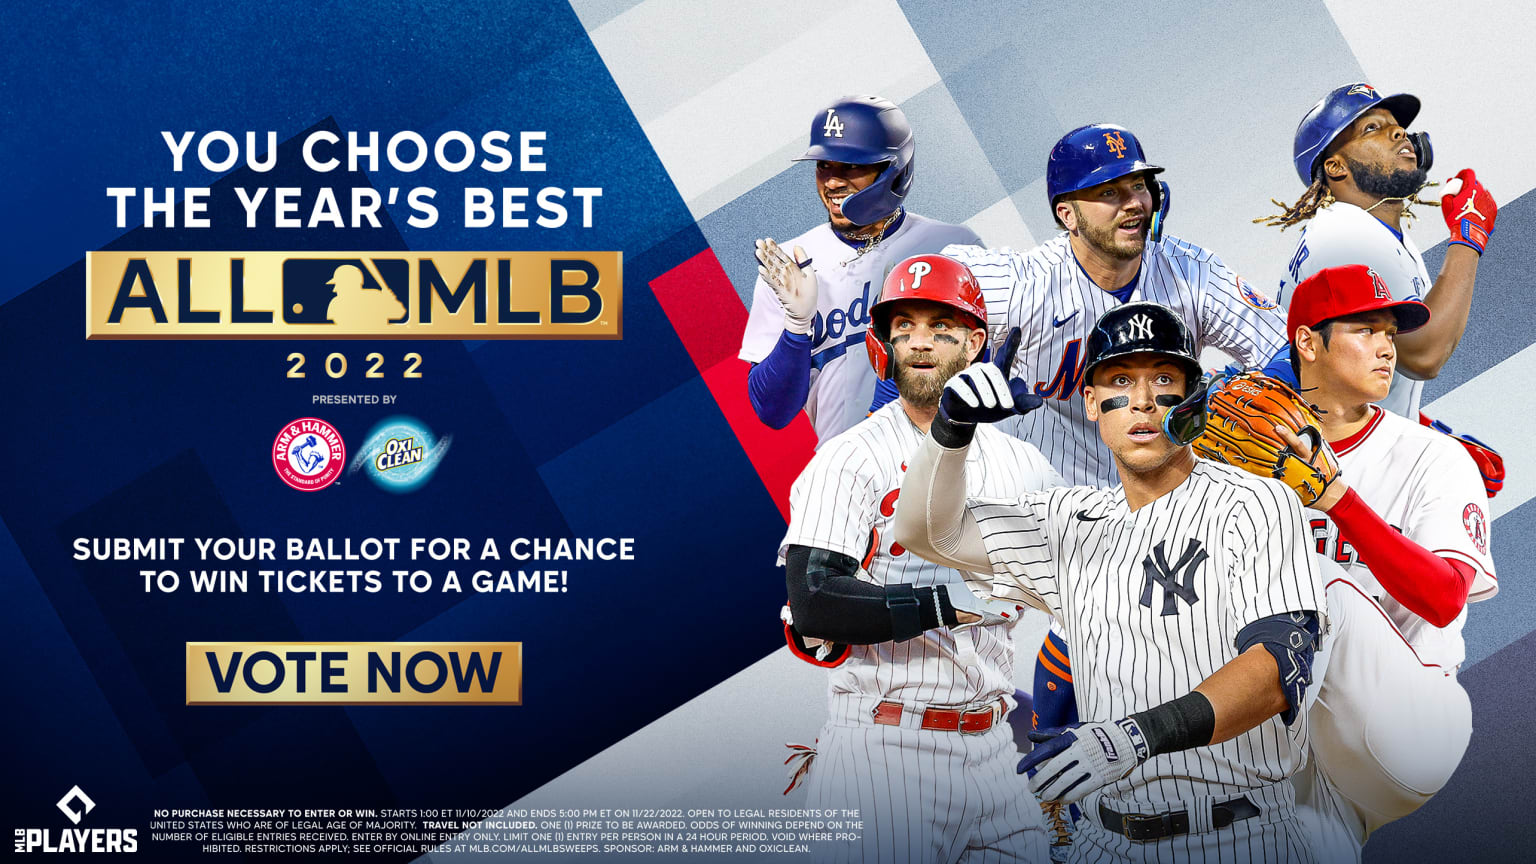 A designed image with 6 players clustered on the right and text on the left promoting the vote for the 2022 All-MLB Team